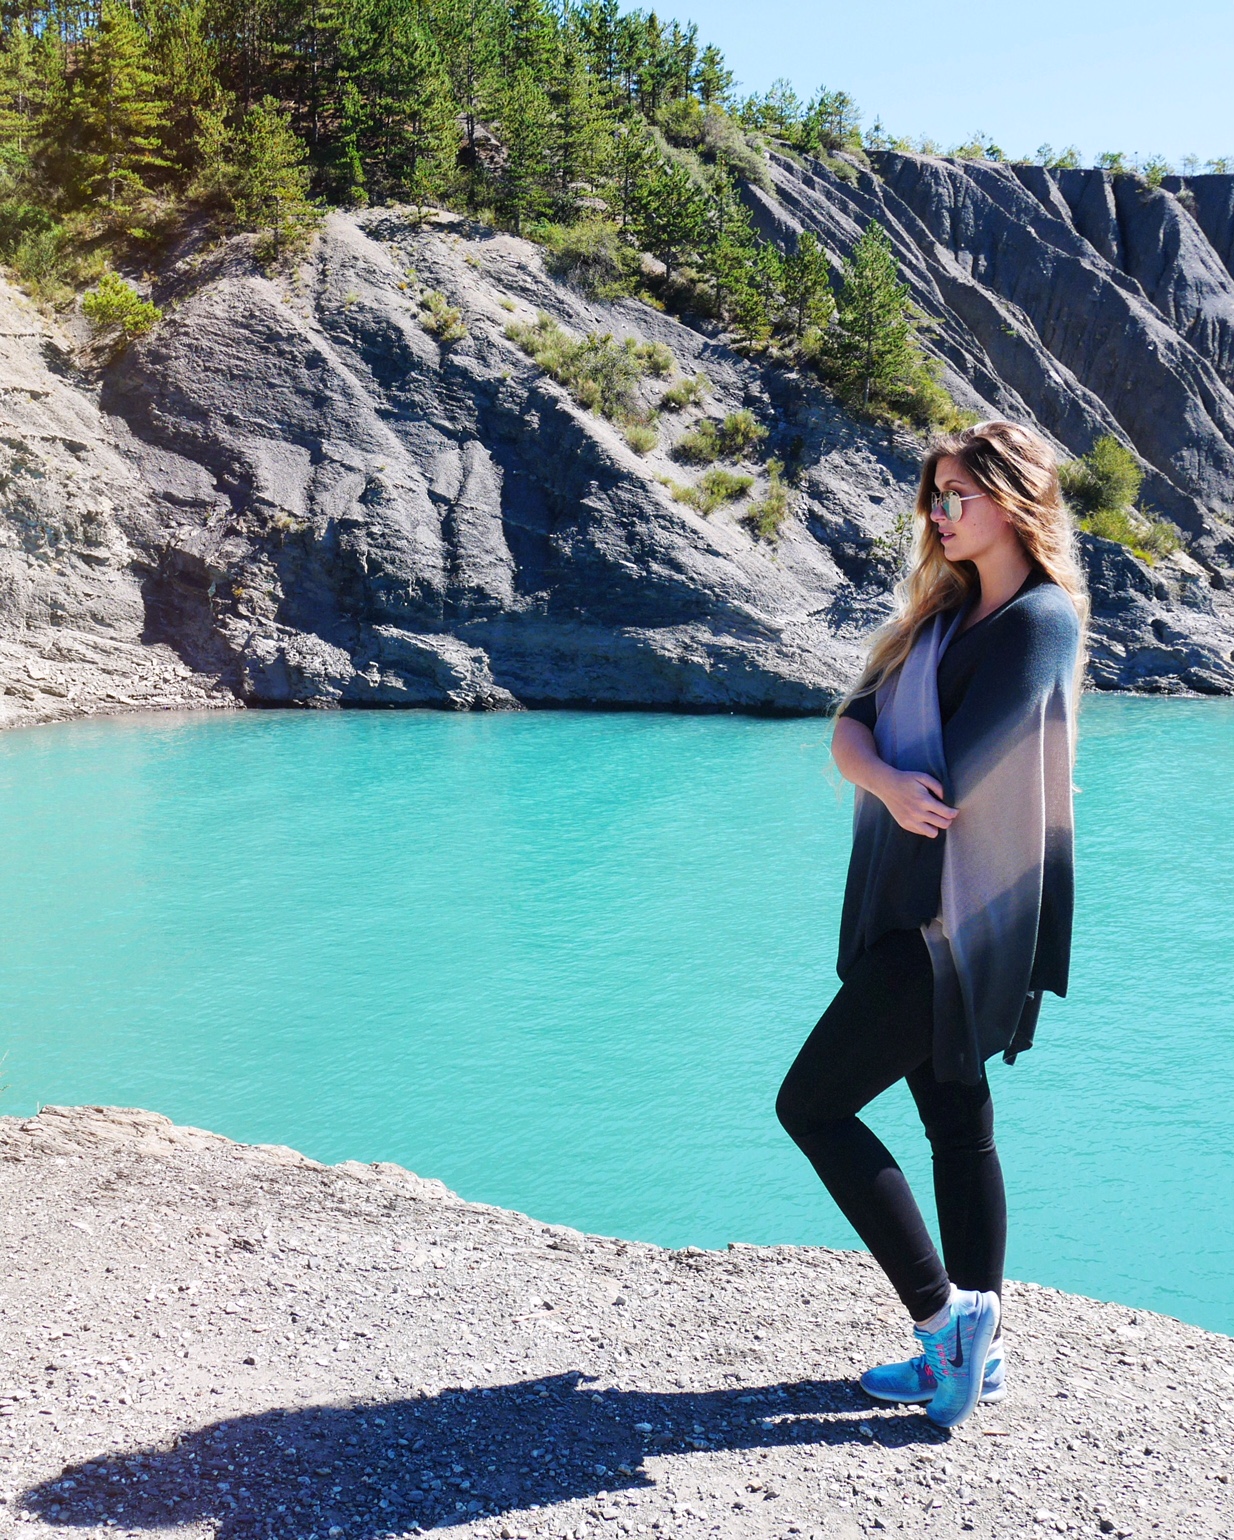 Me posing in front of the blue waters of Lac de Serre-Ponçon - French Alps - France